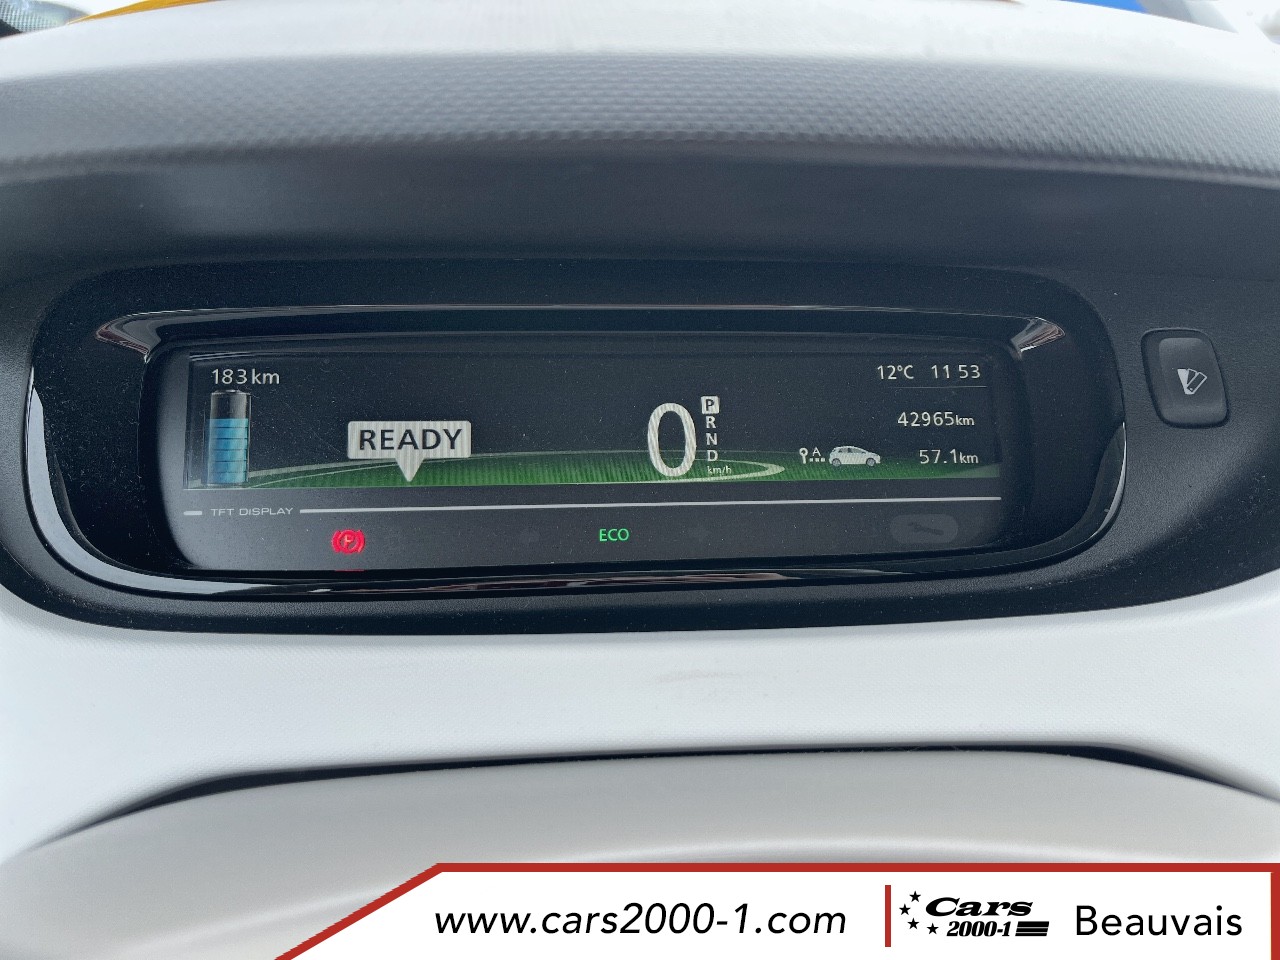 Renault Zoe  R90 Life  charge normale my 19 occasion - Photo 23